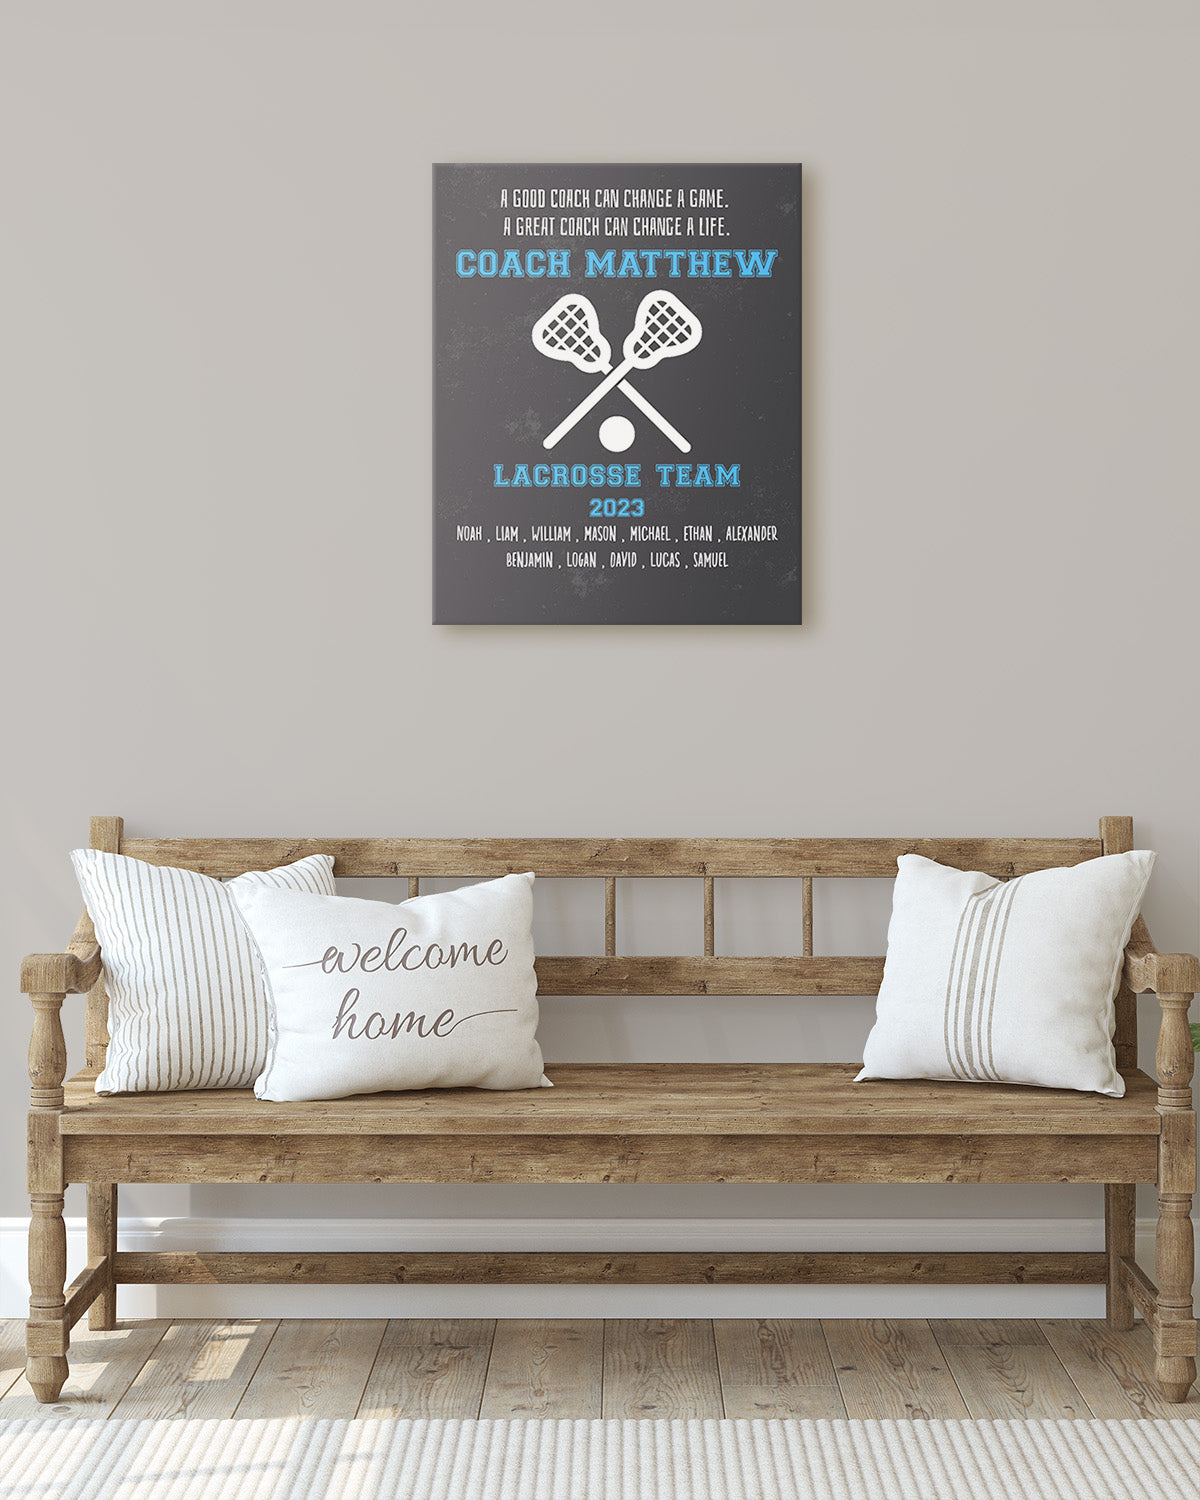 Lacrosse Coach Appreciation Gift - Customize With Athlete Names, Coach's Names, Team Name, Year or Season - Motivational Sports Wall Art - Coach's Quote